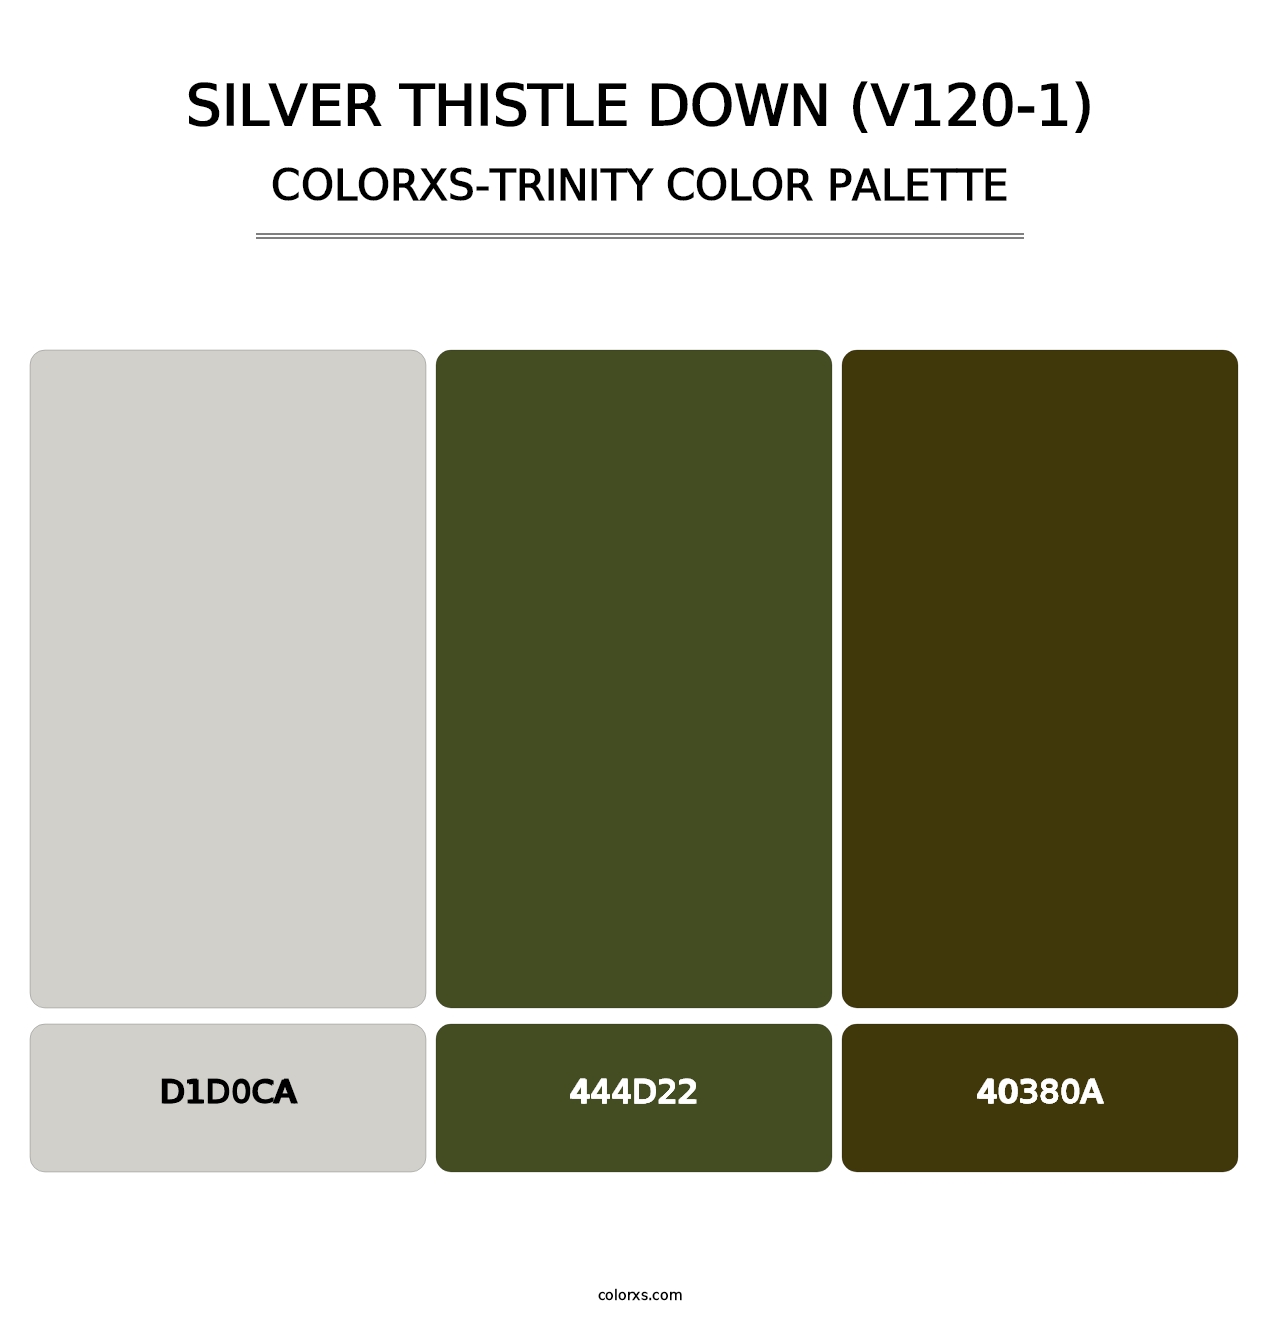 Silver Thistle Down (V120-1) - Colorxs Trinity Palette